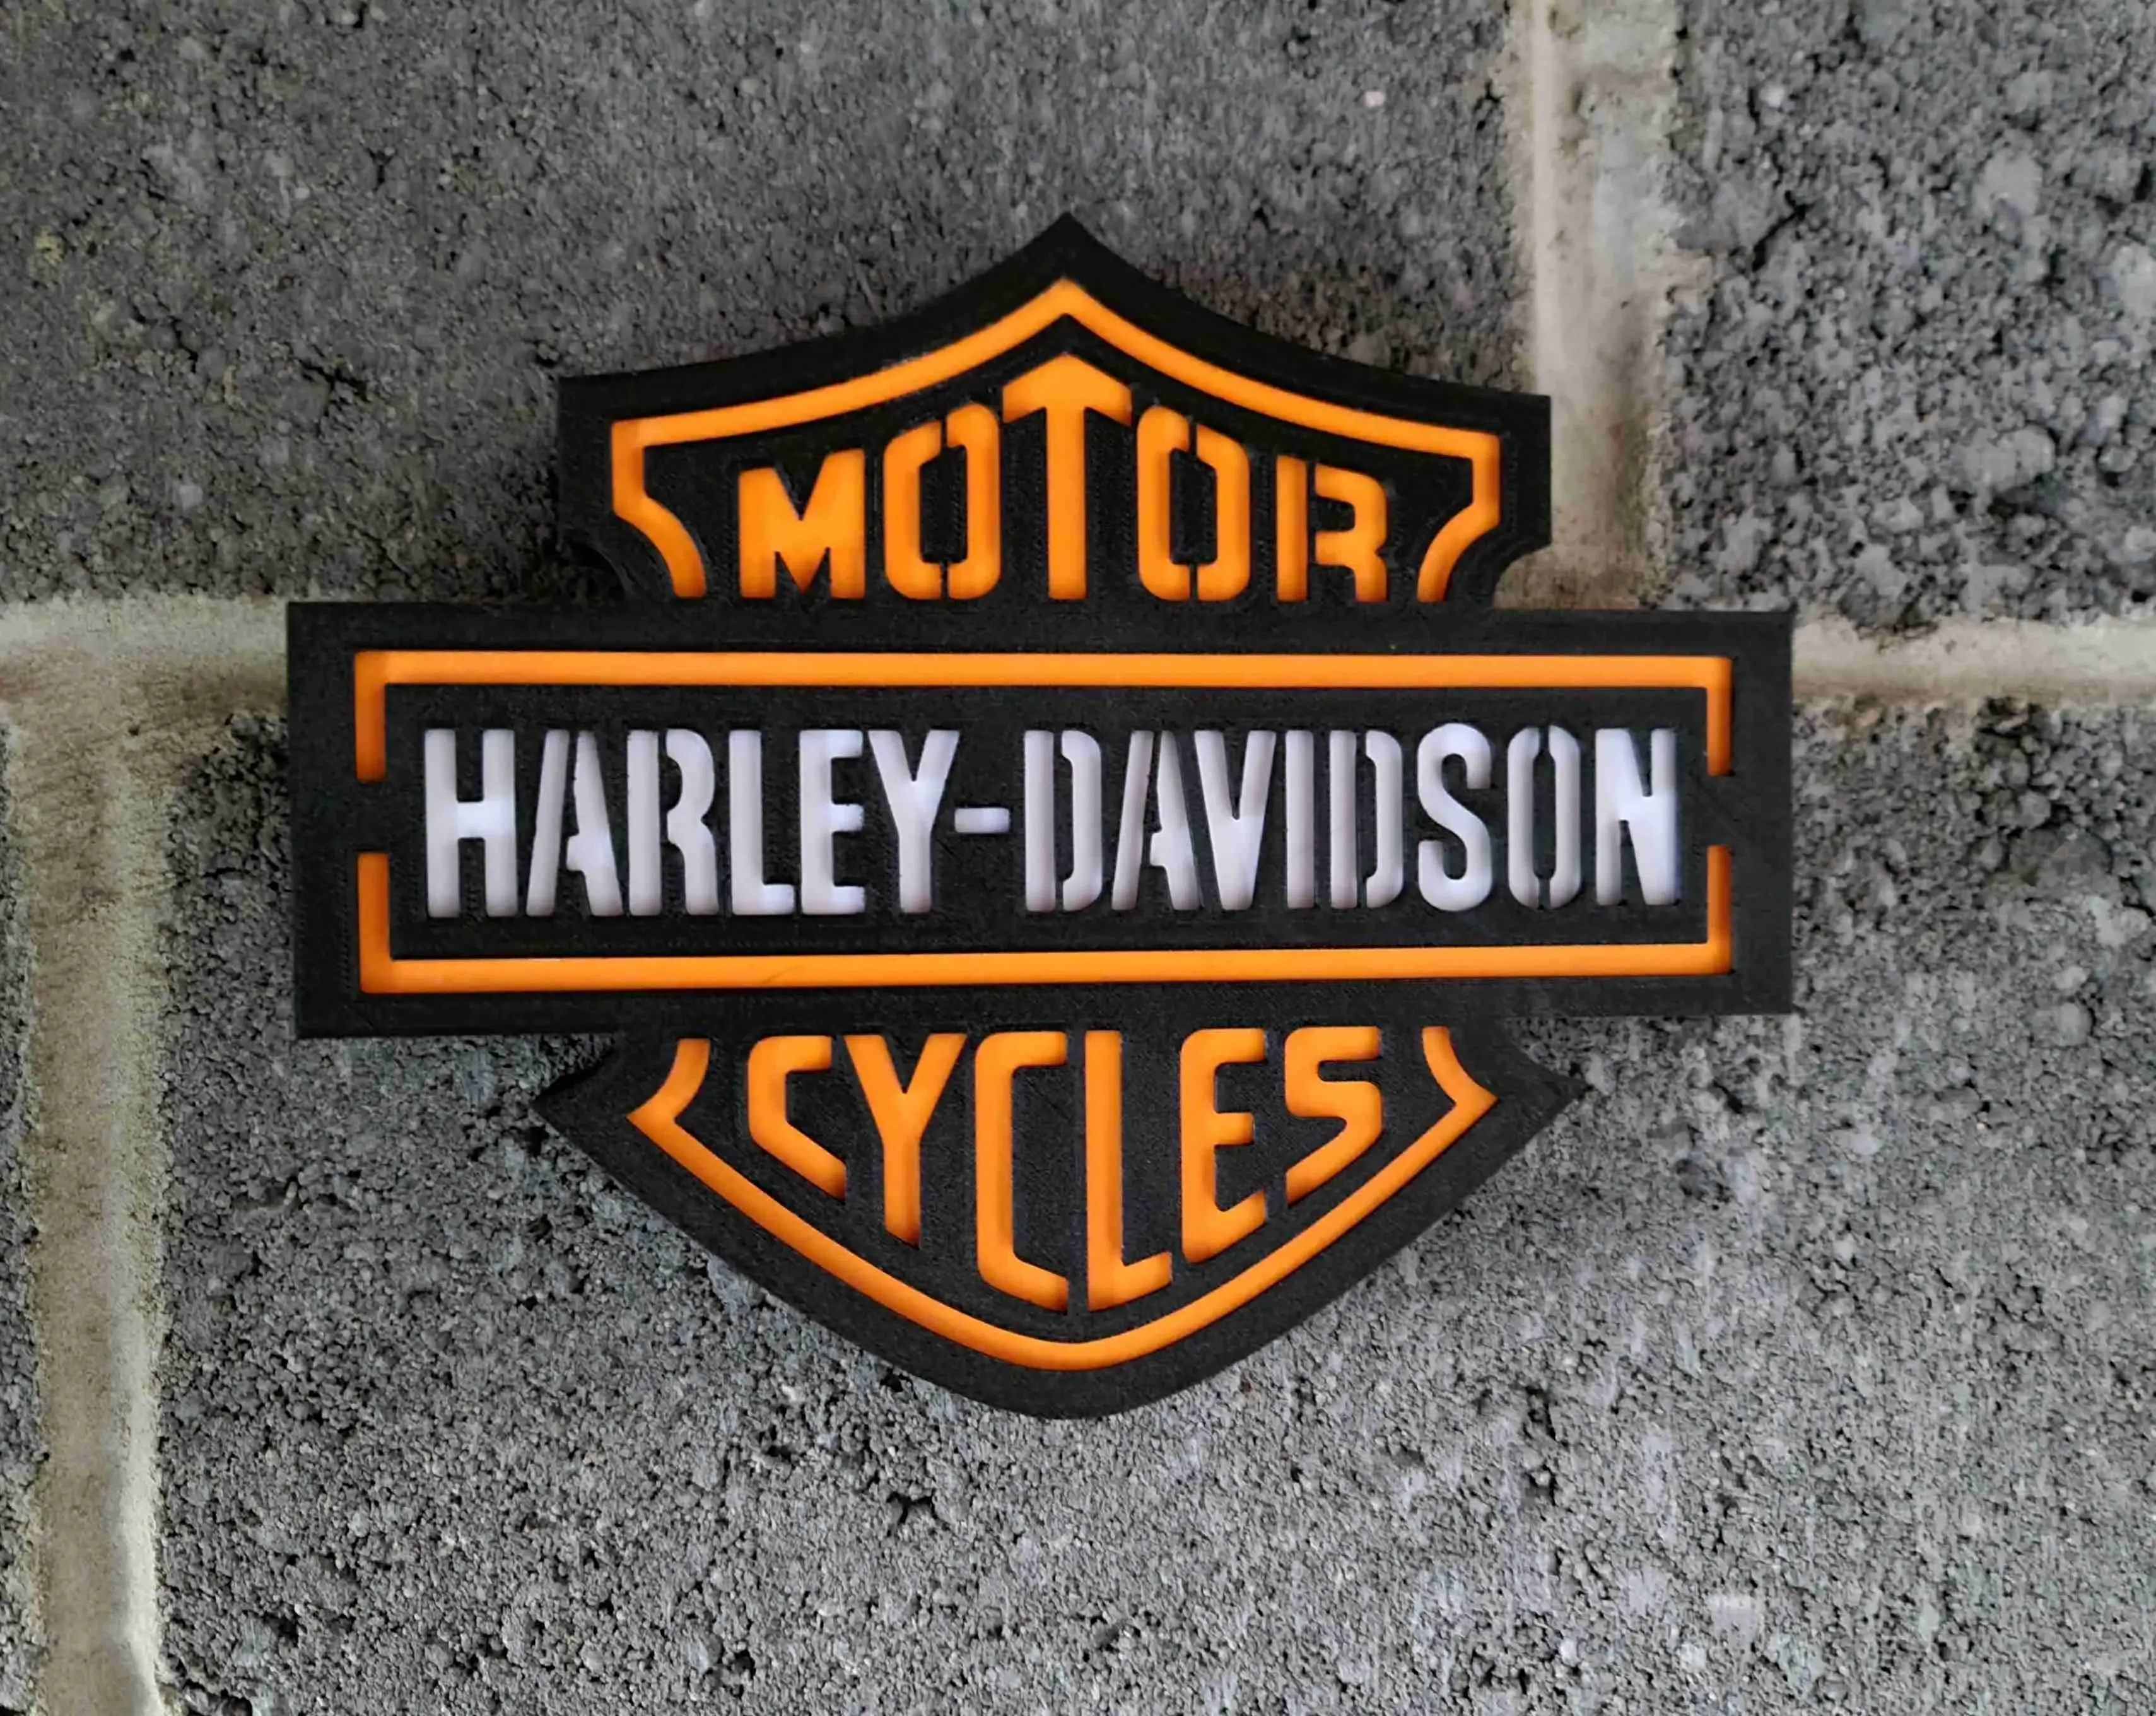 Harley Davidson Motorcycles Lightbox Wall Mounted Desk Stand